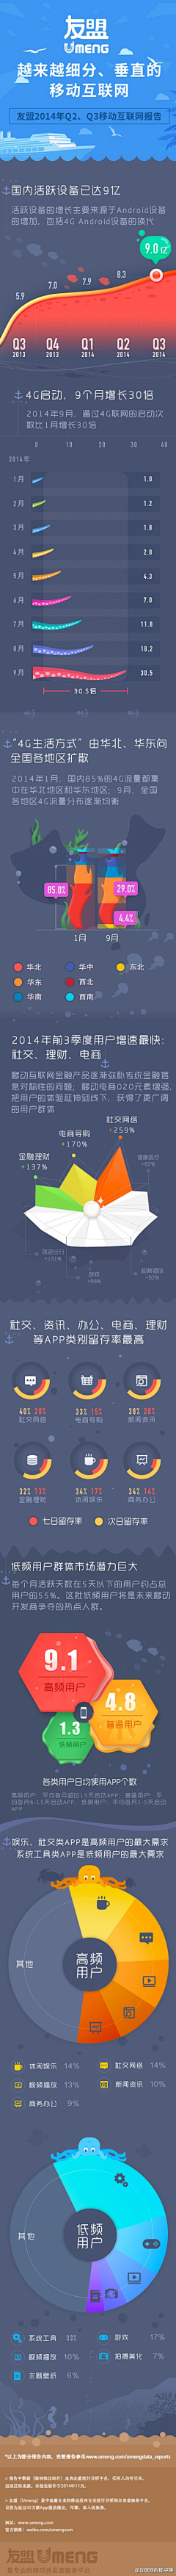 we_young_smile采集到APP